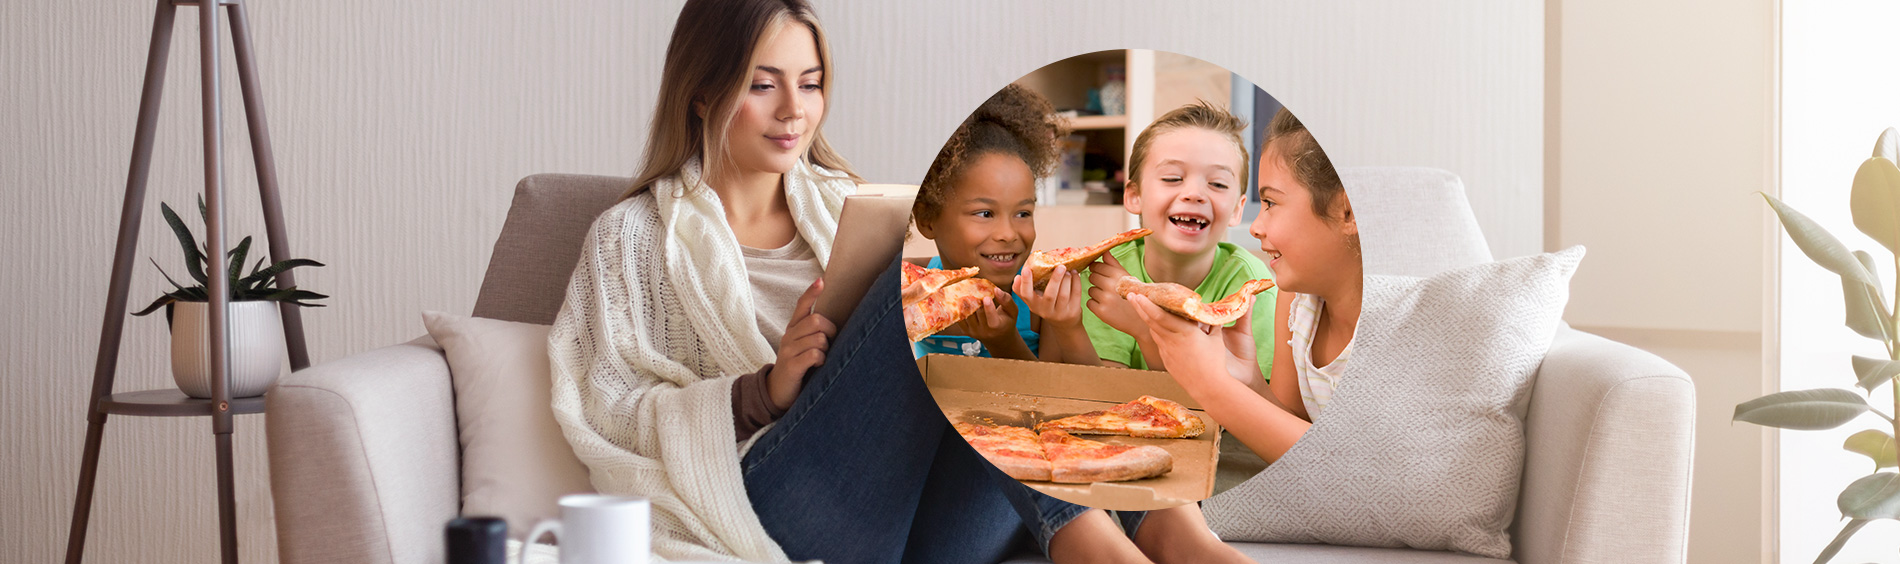 Adult reading and kids eating pizza